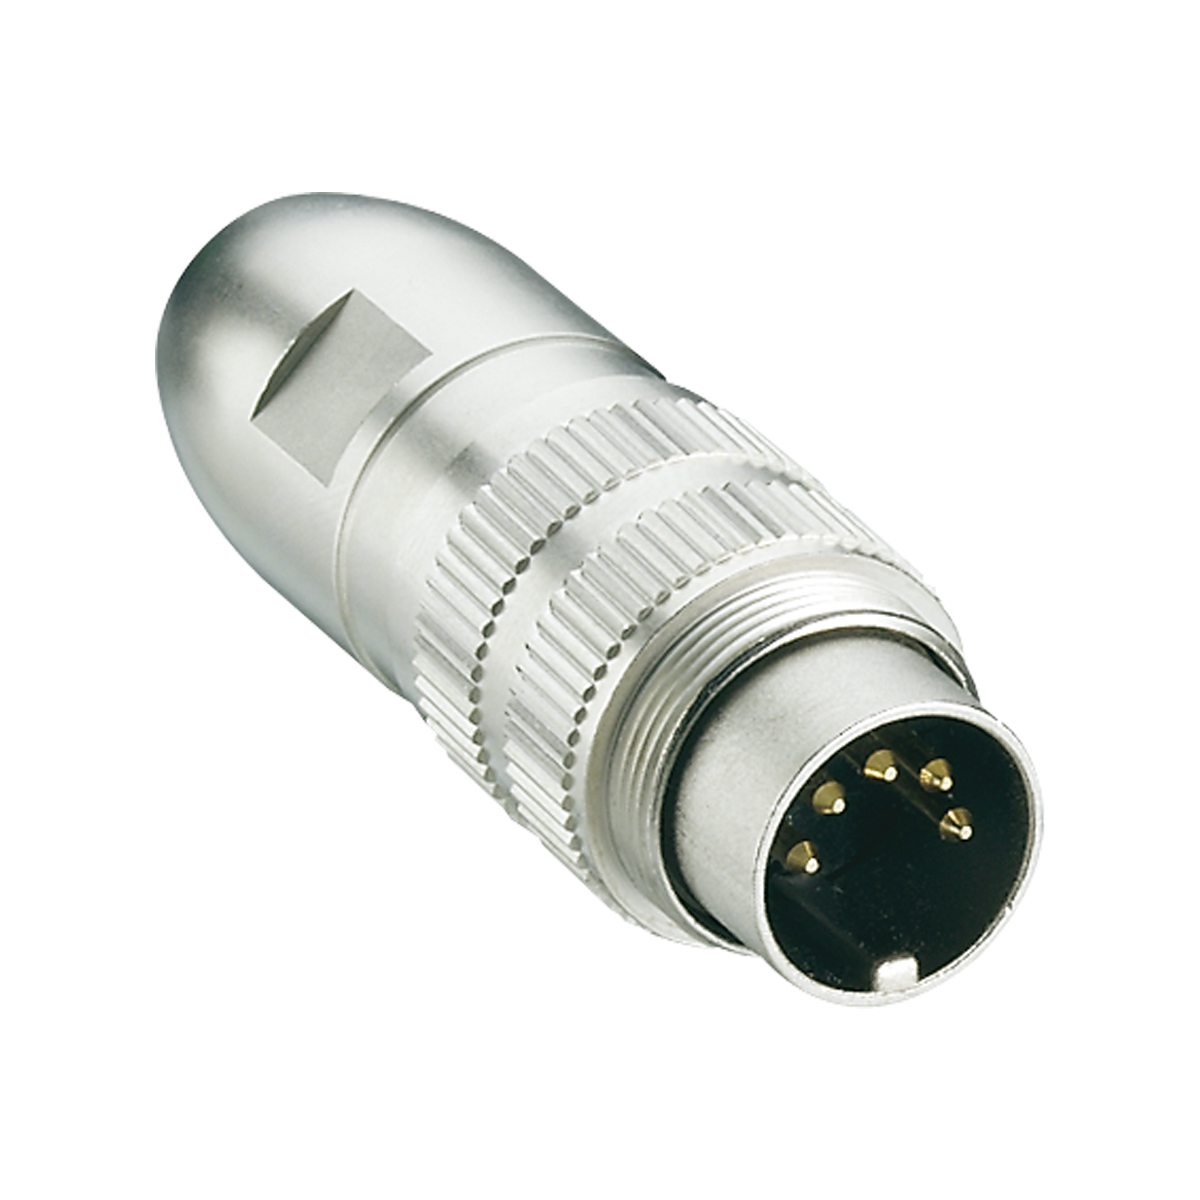 Lumberg: 332 (Series 03 | Circular connectors with threaded joint M16 acc. to IEC 61076-2-106, IP40/IP68)